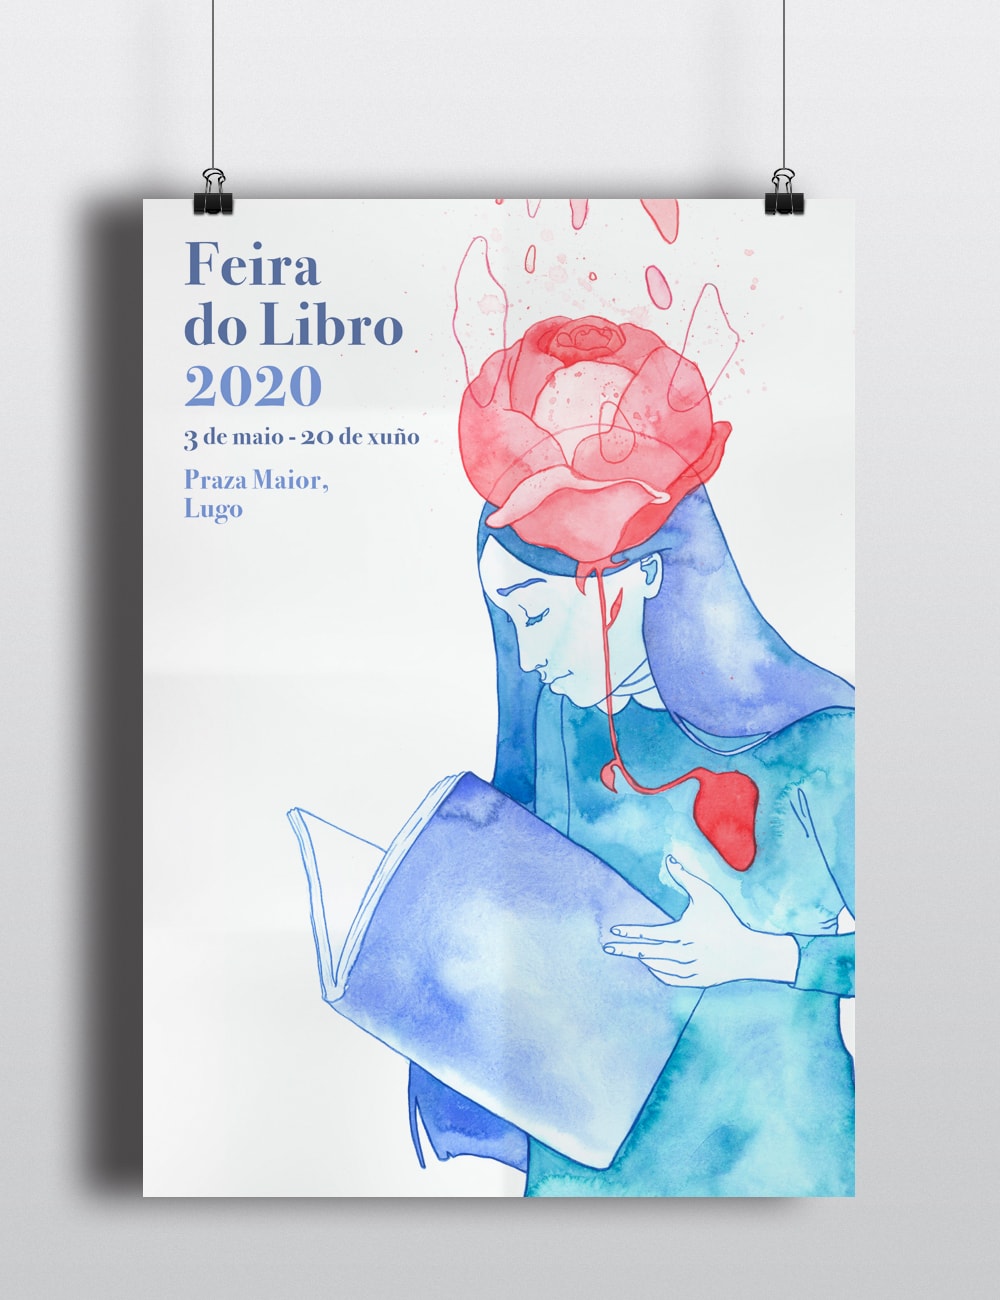 International Book Fair in Moscow: Exhibition Poster